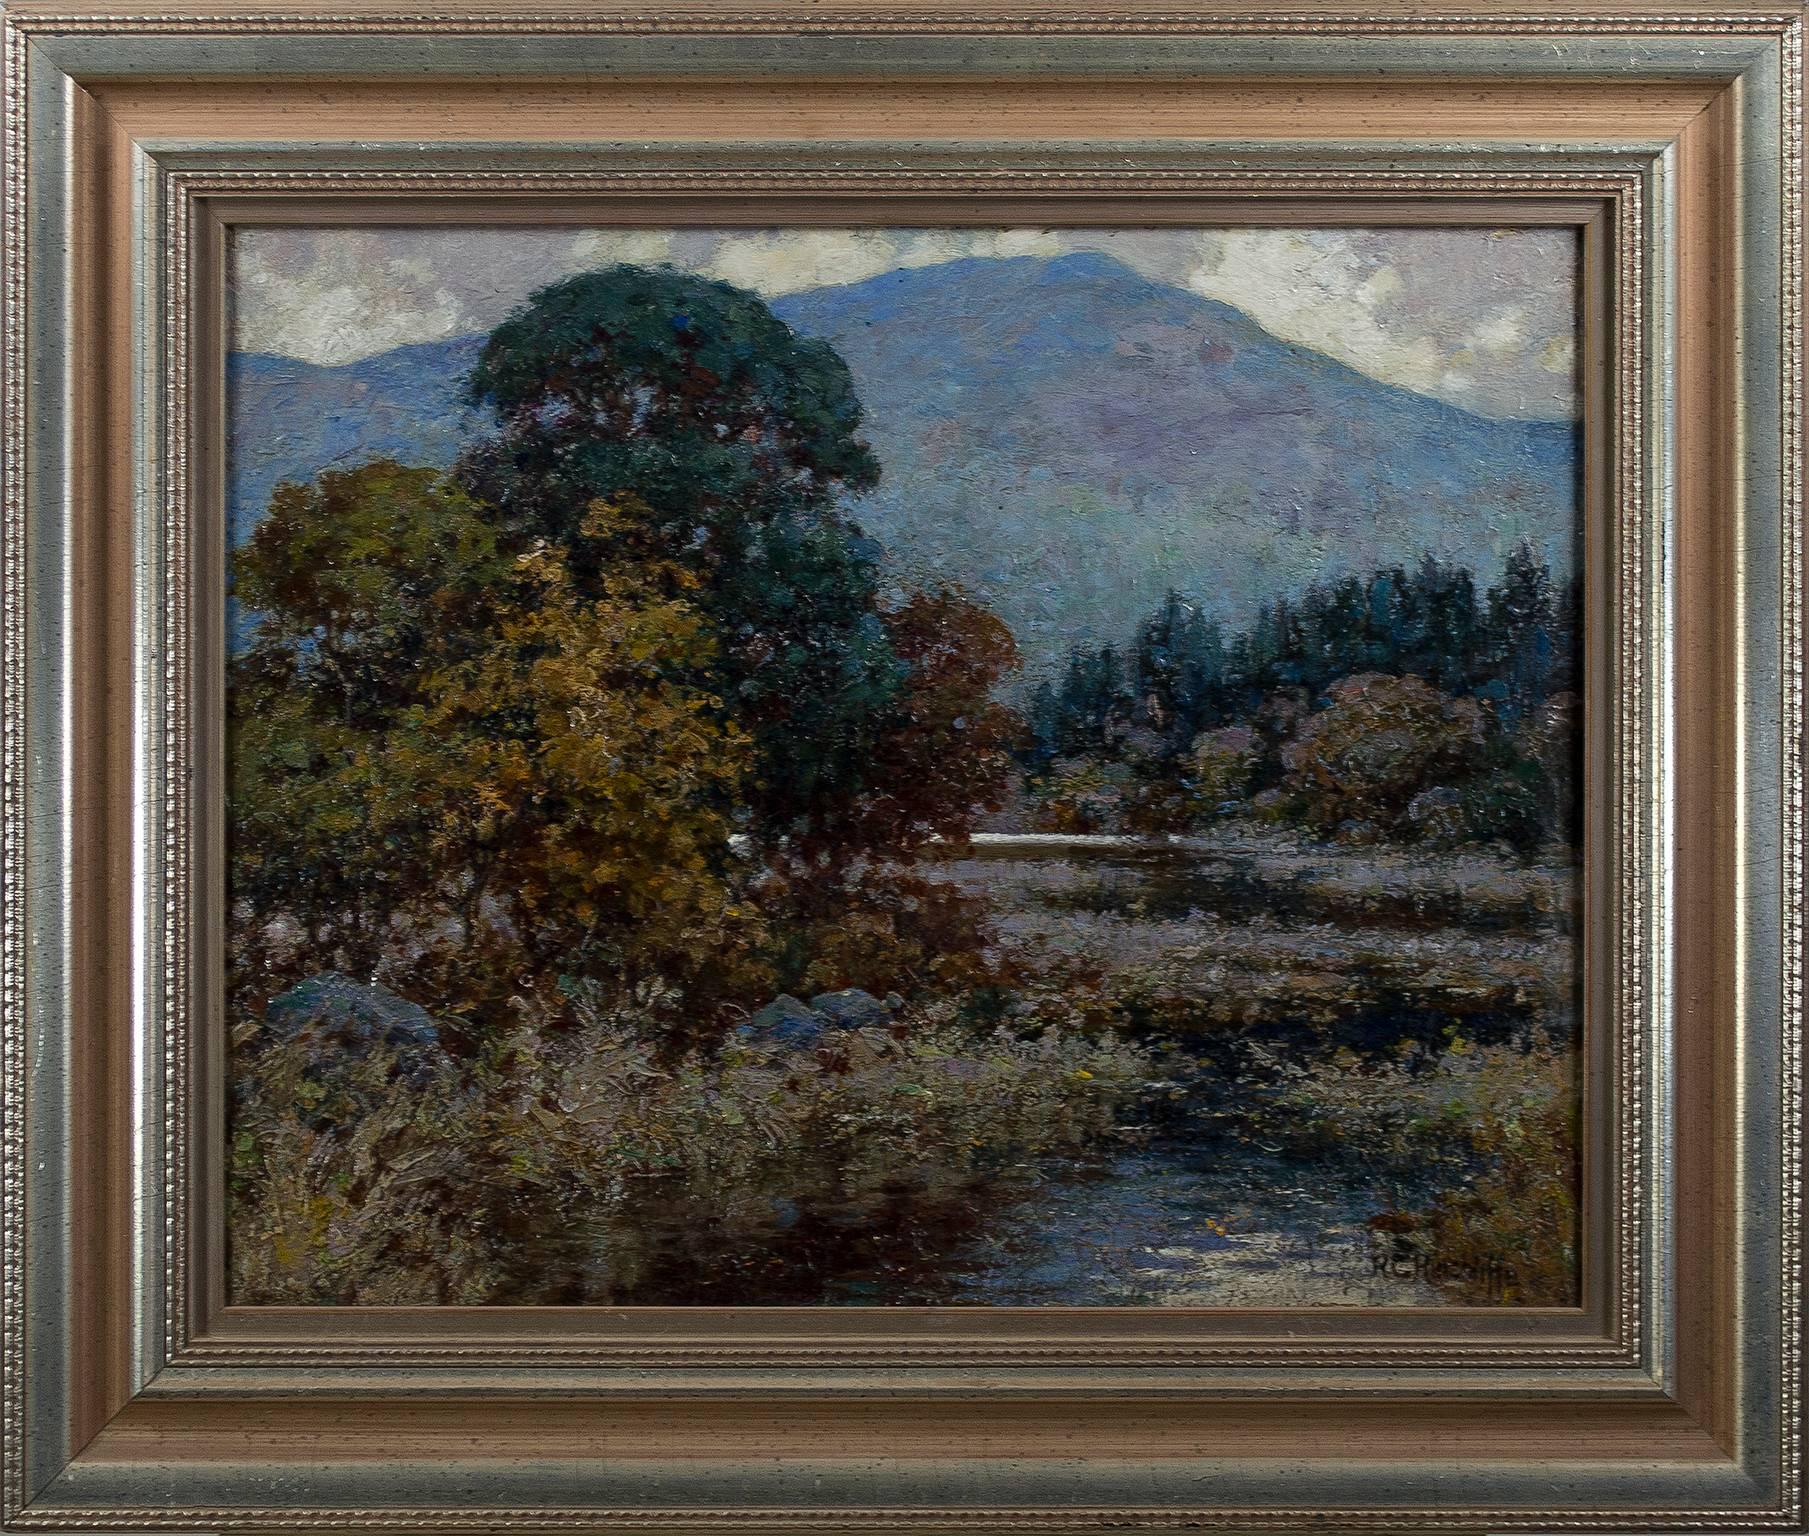 River Landscape in Blue - Painting by Richard George Hinchcliffe